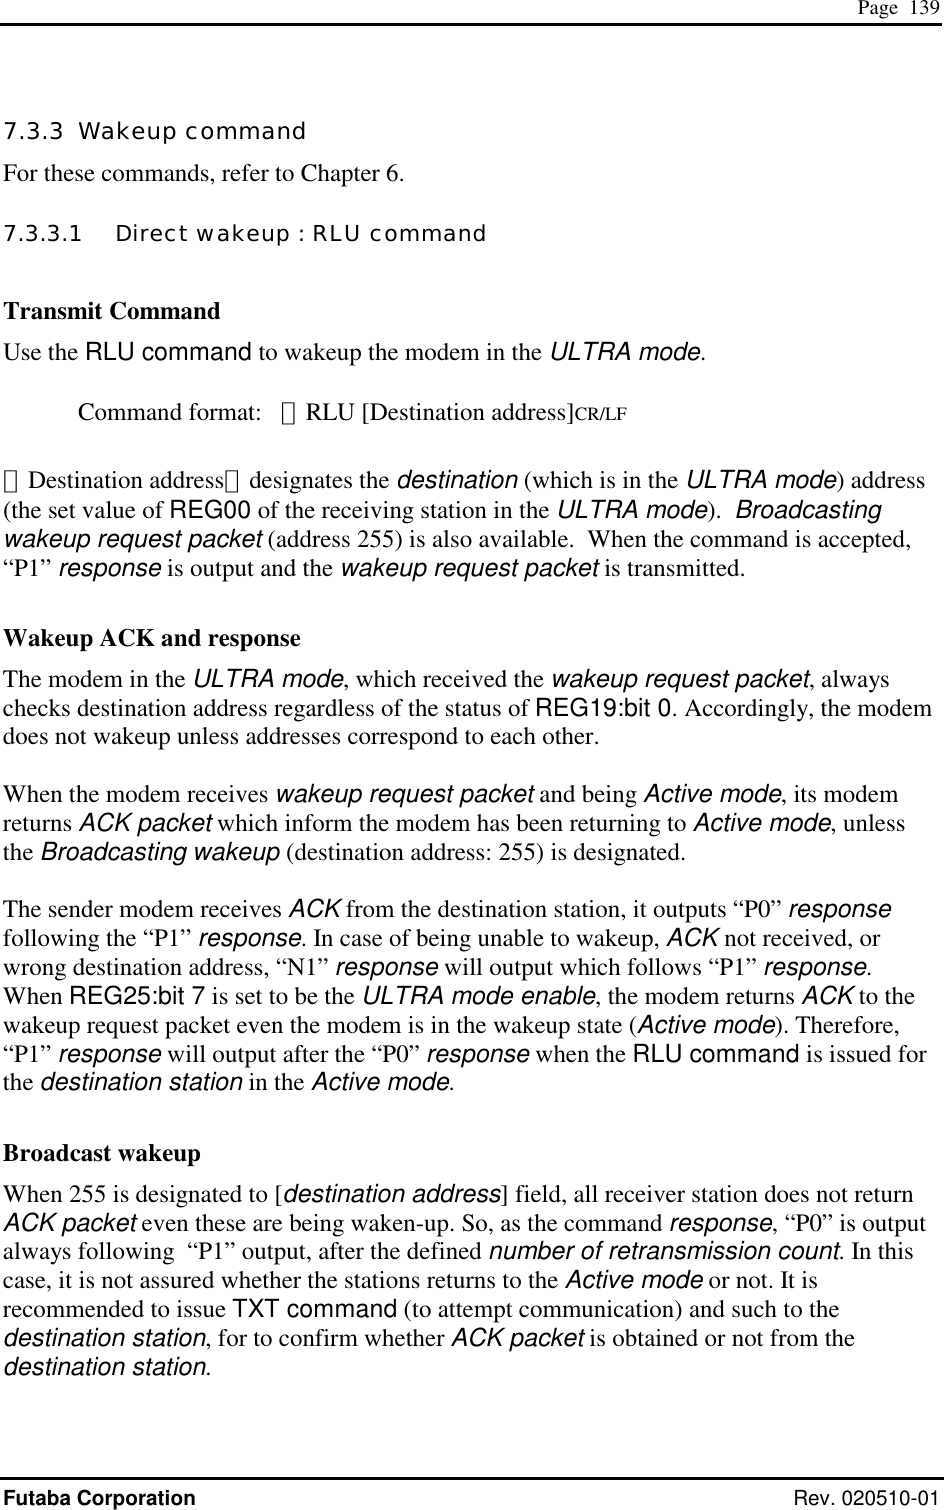  Page  139 Futaba Corporation Rev. 020510-01 7.3.3  Wakeup command For these commands, refer to Chapter 6. 7.3.3.1   Direct wakeup : RLU command  Transmit Command Use the RLU command to wakeup the modem in the ULTRA mode.  Command format:   ＠RLU [Destination address]CR/LF  ［Destination address］designates the destination (which is in the ULTRA mode) address (the set value of REG00 of the receiving station in the ULTRA mode).  Broadcasting wakeup request packet (address 255) is also available.  When the command is accepted, “P1” response is output and the wakeup request packet is transmitted.    Wakeup ACK and response The modem in the ULTRA mode, which received the wakeup request packet, always checks destination address regardless of the status of REG19:bit 0. Accordingly, the modem does not wakeup unless addresses correspond to each other.  When the modem receives wakeup request packet and being Active mode, its modem returns ACK packet which inform the modem has been returning to Active mode, unless the Broadcasting wakeup (destination address: 255) is designated.  The sender modem receives ACK from the destination station, it outputs “P0” response following the “P1” response. In case of being unable to wakeup, ACK not received, or wrong destination address, “N1” response will output which follows “P1” response. When REG25:bit 7 is set to be the ULTRA mode enable, the modem returns ACK to the wakeup request packet even the modem is in the wakeup state (Active mode). Therefore, “P1” response will output after the “P0” response when the RLU command is issued for the destination station in the Active mode.  Broadcast wakeup When 255 is designated to [destination address] field, all receiver station does not return ACK packet even these are being waken-up. So, as the command response, “P0” is output always following  “P1” output, after the defined number of retransmission count. In this case, it is not assured whether the stations returns to the Active mode or not. It is recommended to issue TXT command (to attempt communication) and such to the destination station, for to confirm whether ACK packet is obtained or not from the destination station.  